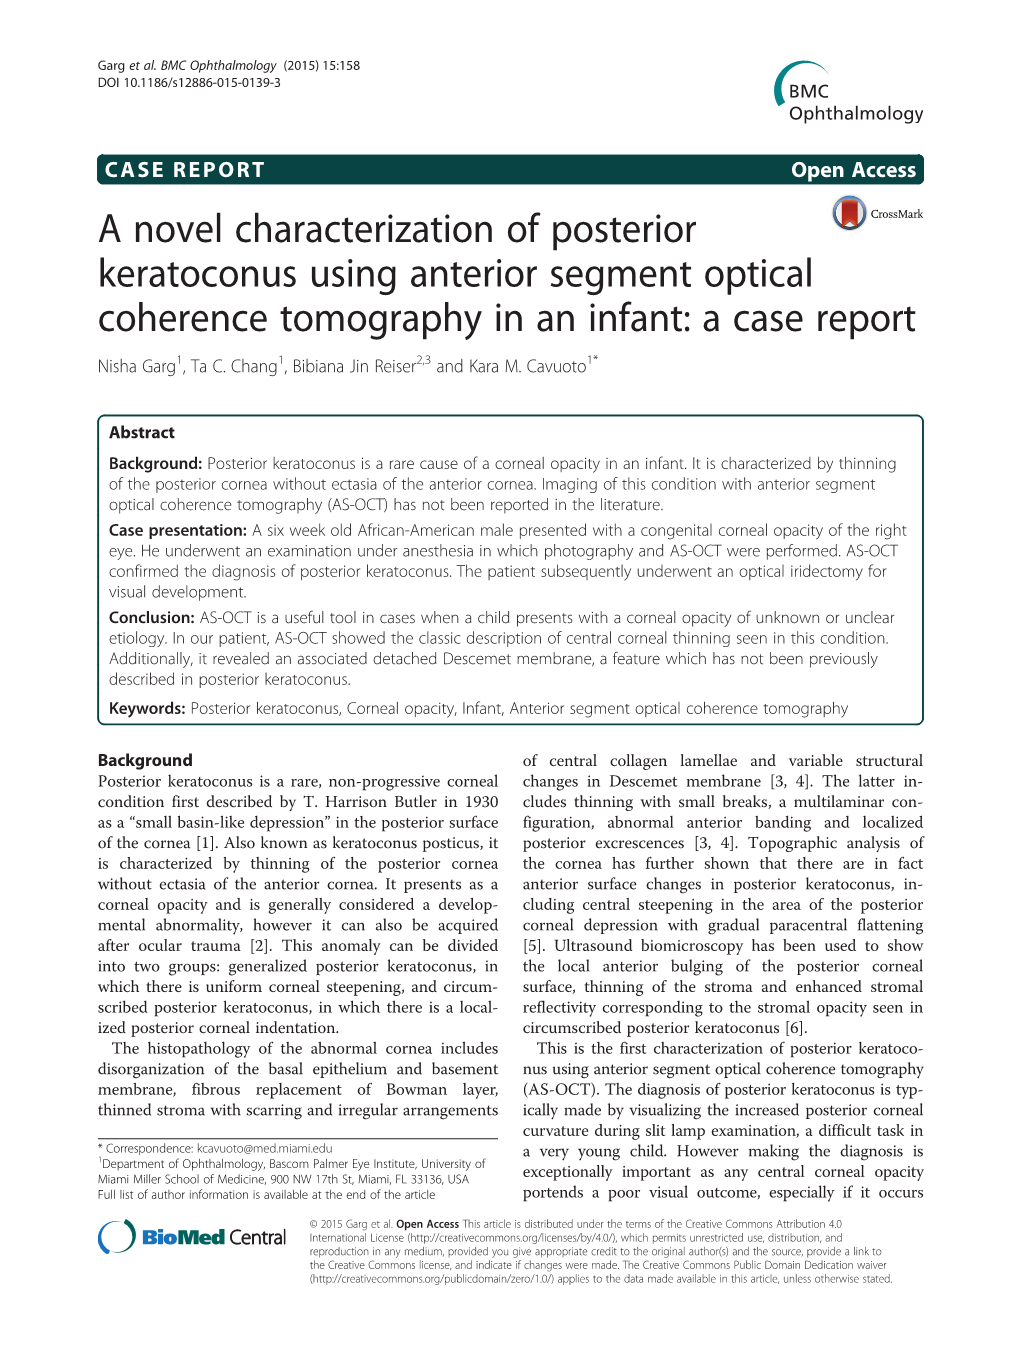 A Novel Characterization of Posterior Keratoconus Using Anterior Segment Optical Coherence Tomography in an Infant: a Case Report Nisha Garg1, Ta C